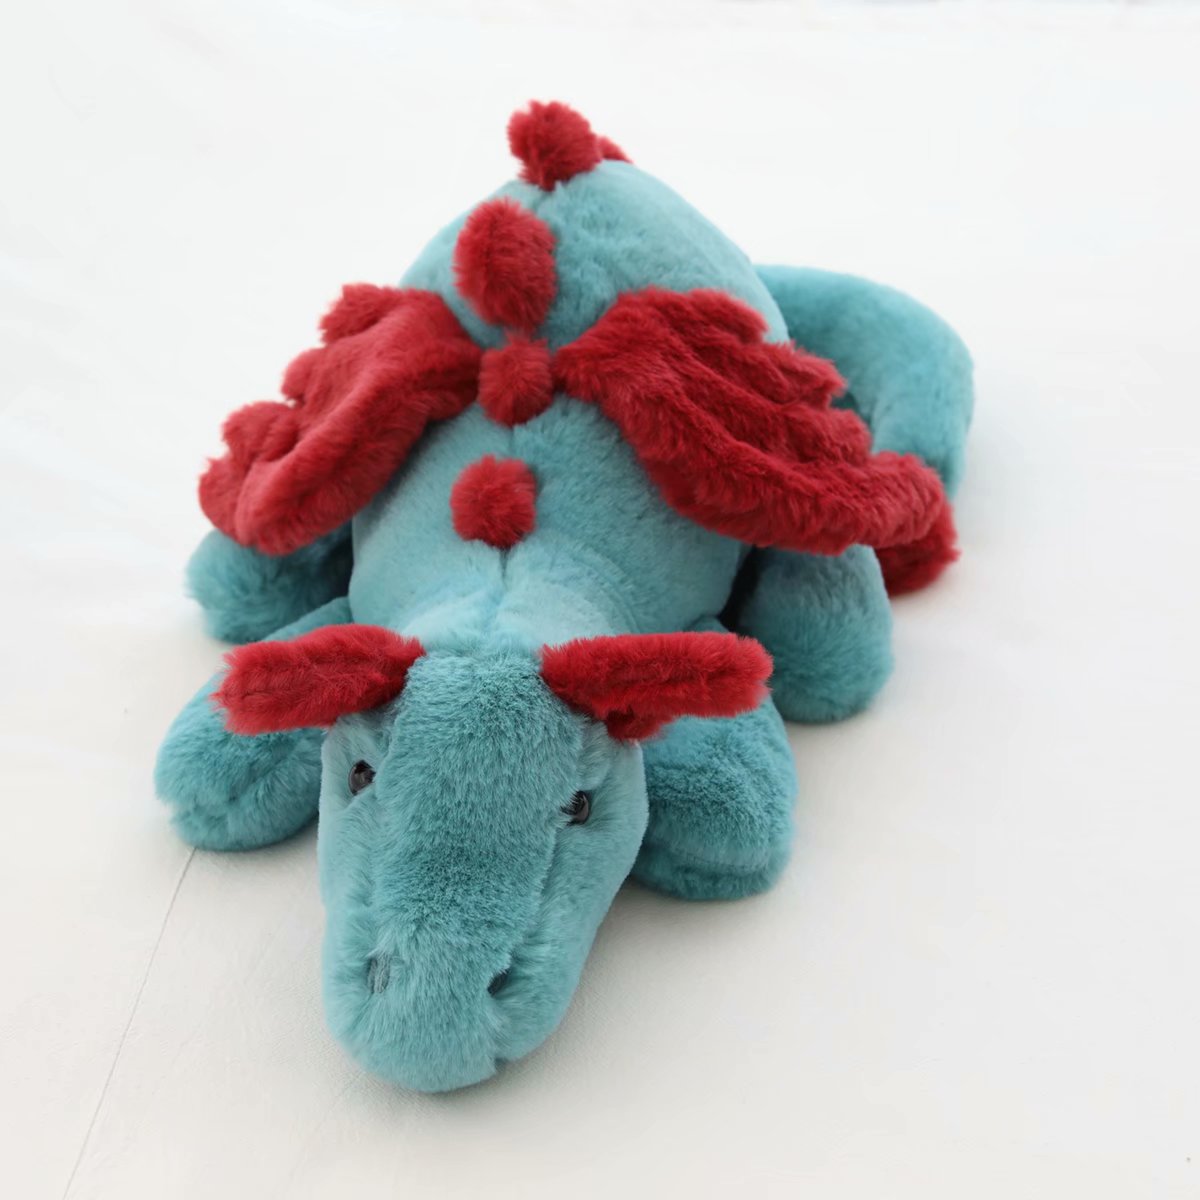 1pc Flying Dragon Plush Toy Green White Cute Fluffy Dragon with Wings Life-like Pterosauria Toy Pillow Kids Toys Gift for Boy